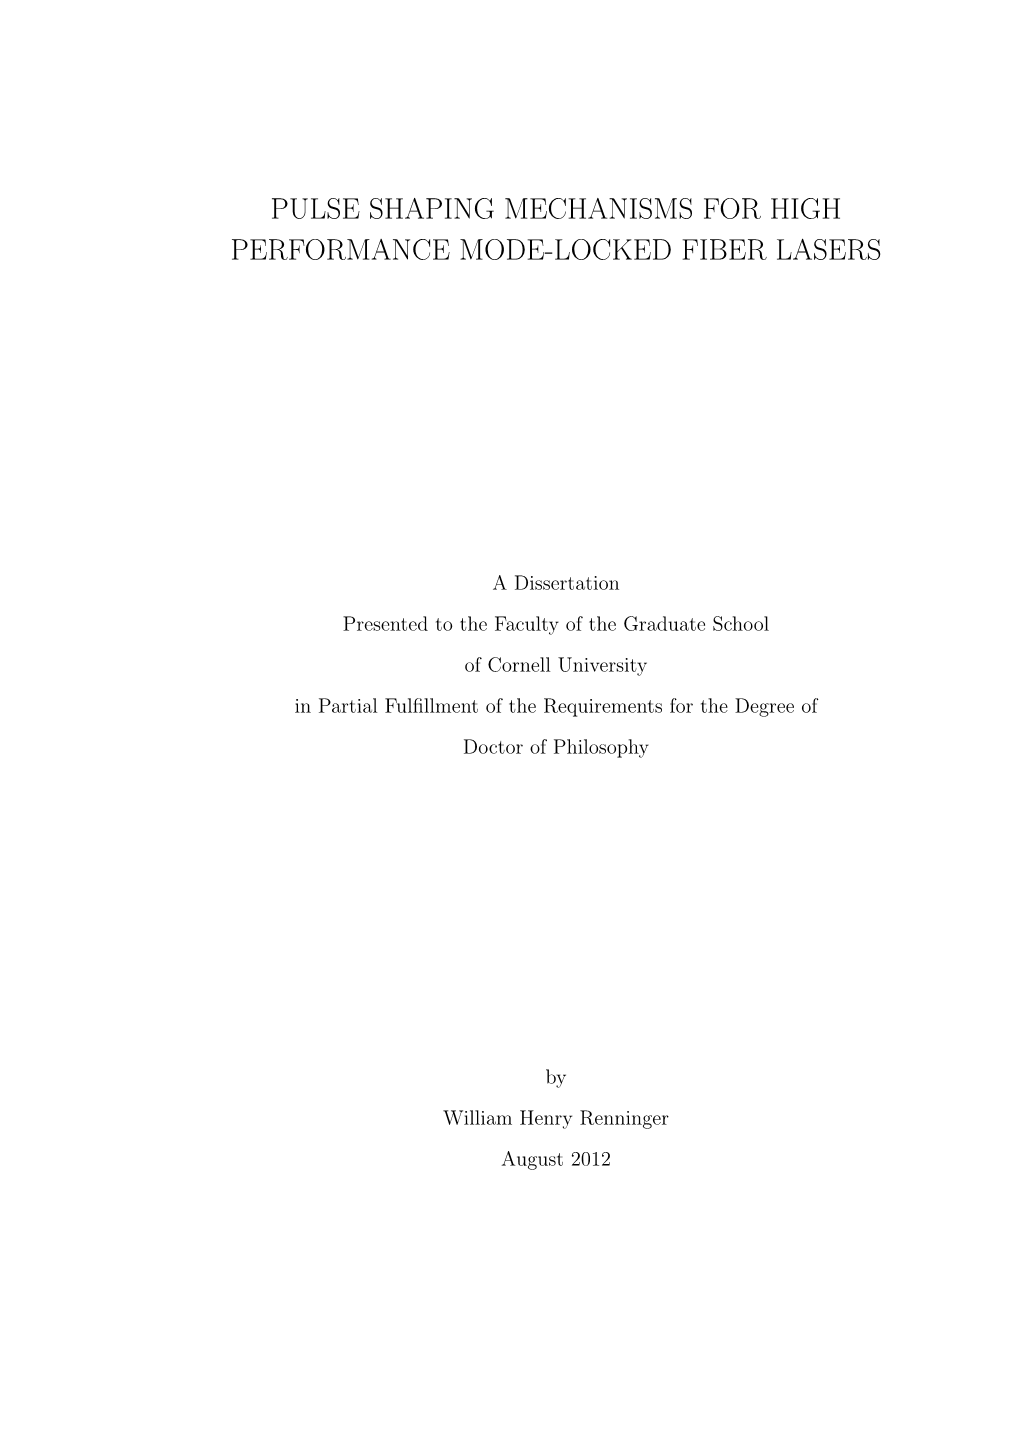 Pulse Shaping Mechanisms for High Performance Mode-Locked Fiber Lasers